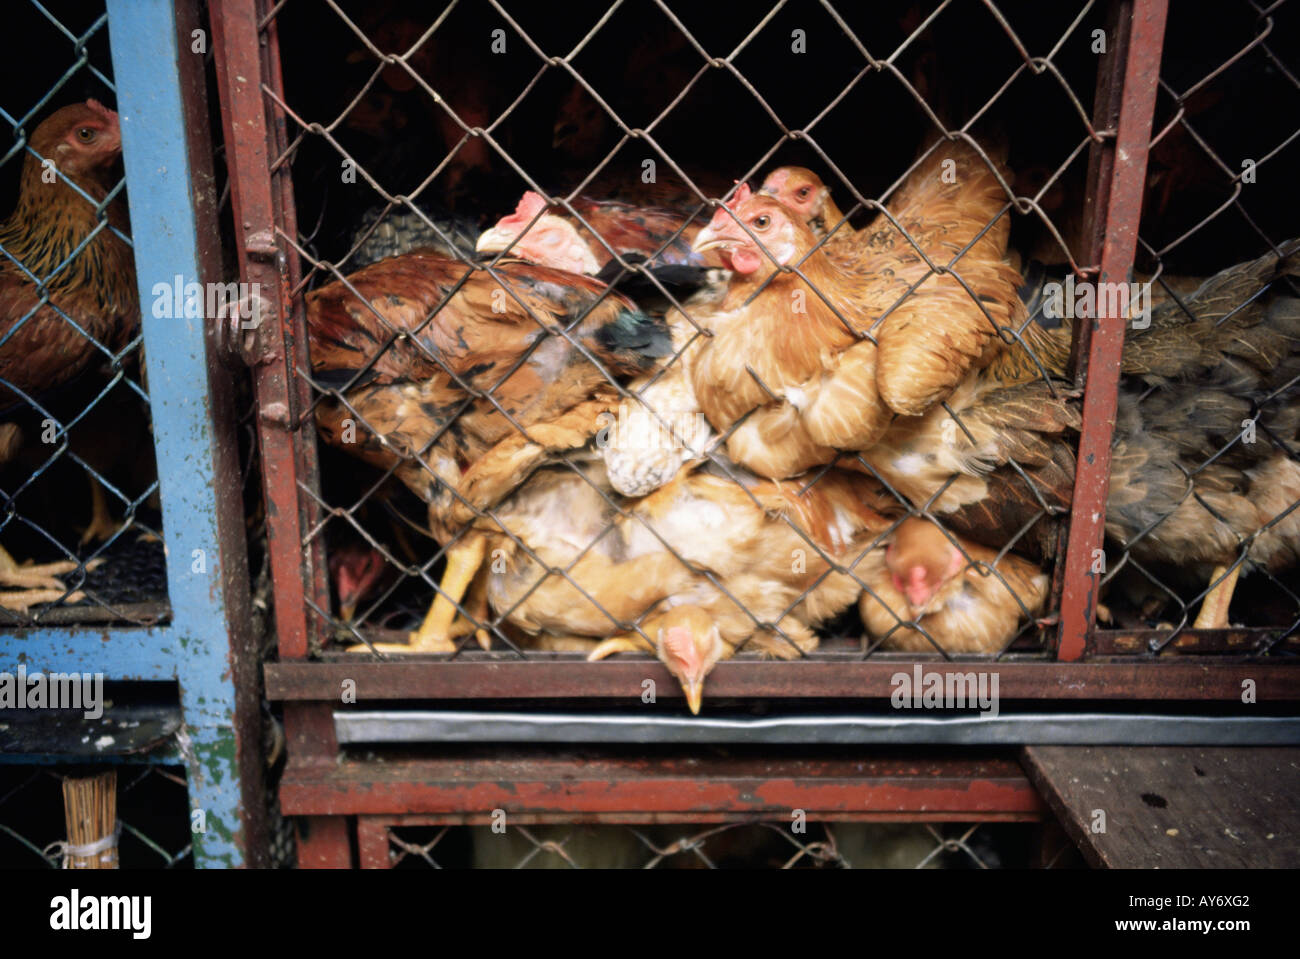 Chickens squashed together in cage Stock Photo